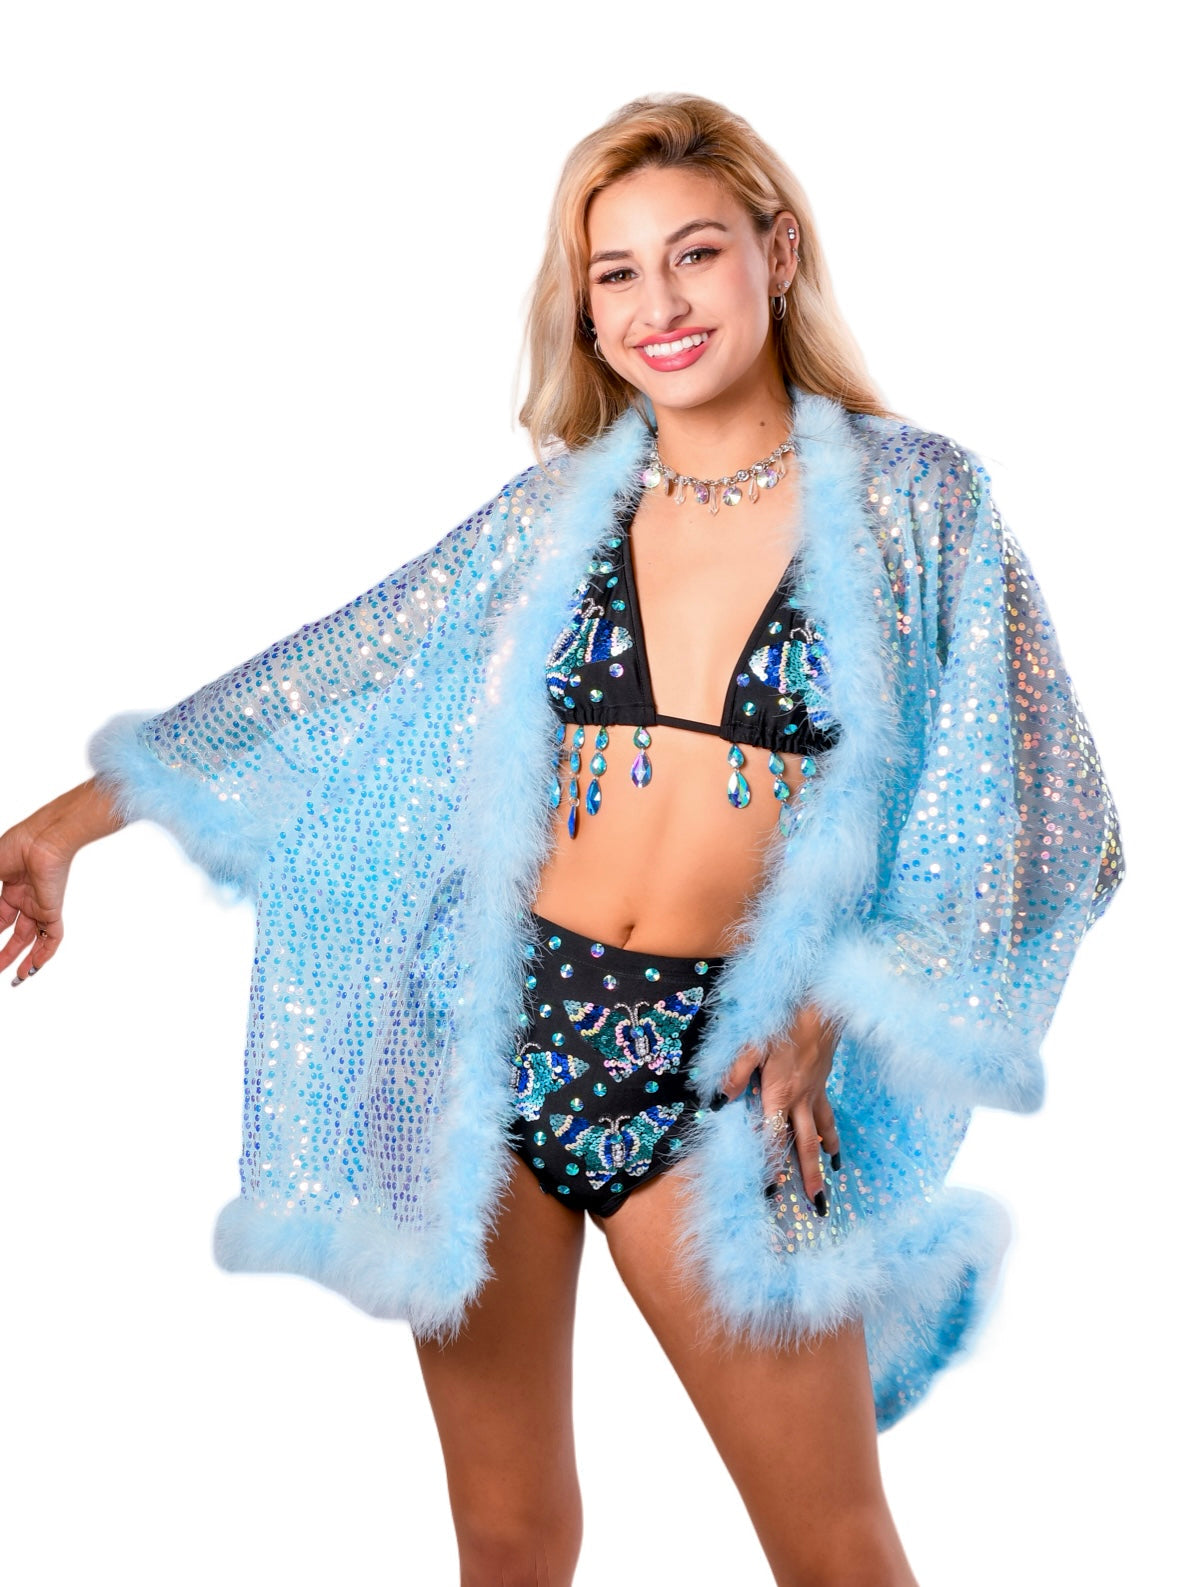 FULL OUTFIT - Blue Butterfly (Set + Fuzzy Sequin Kimono)